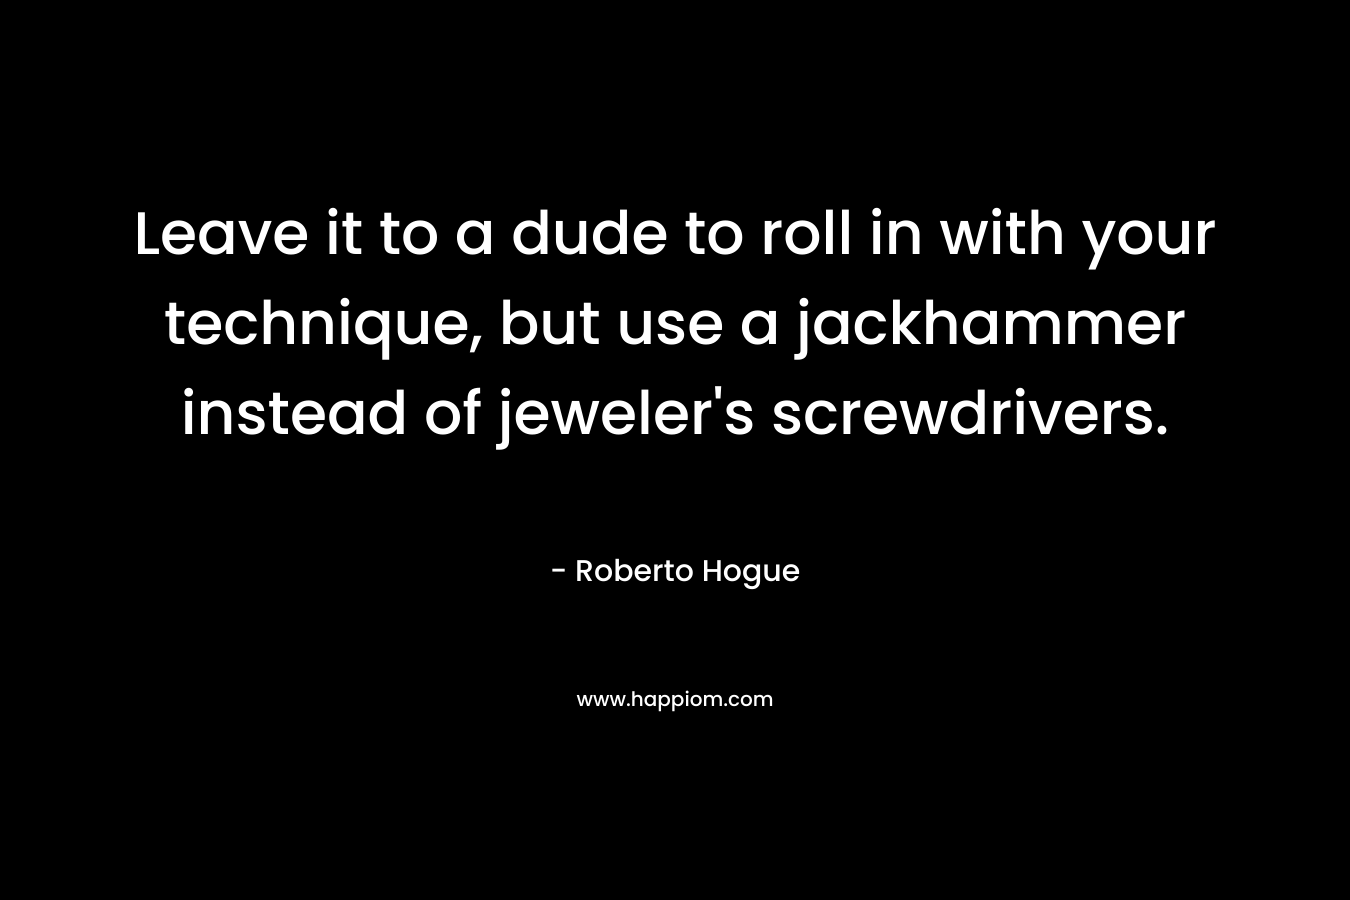 Leave it to a dude to roll in with your technique, but use a jackhammer instead of jeweler's screwdrivers.